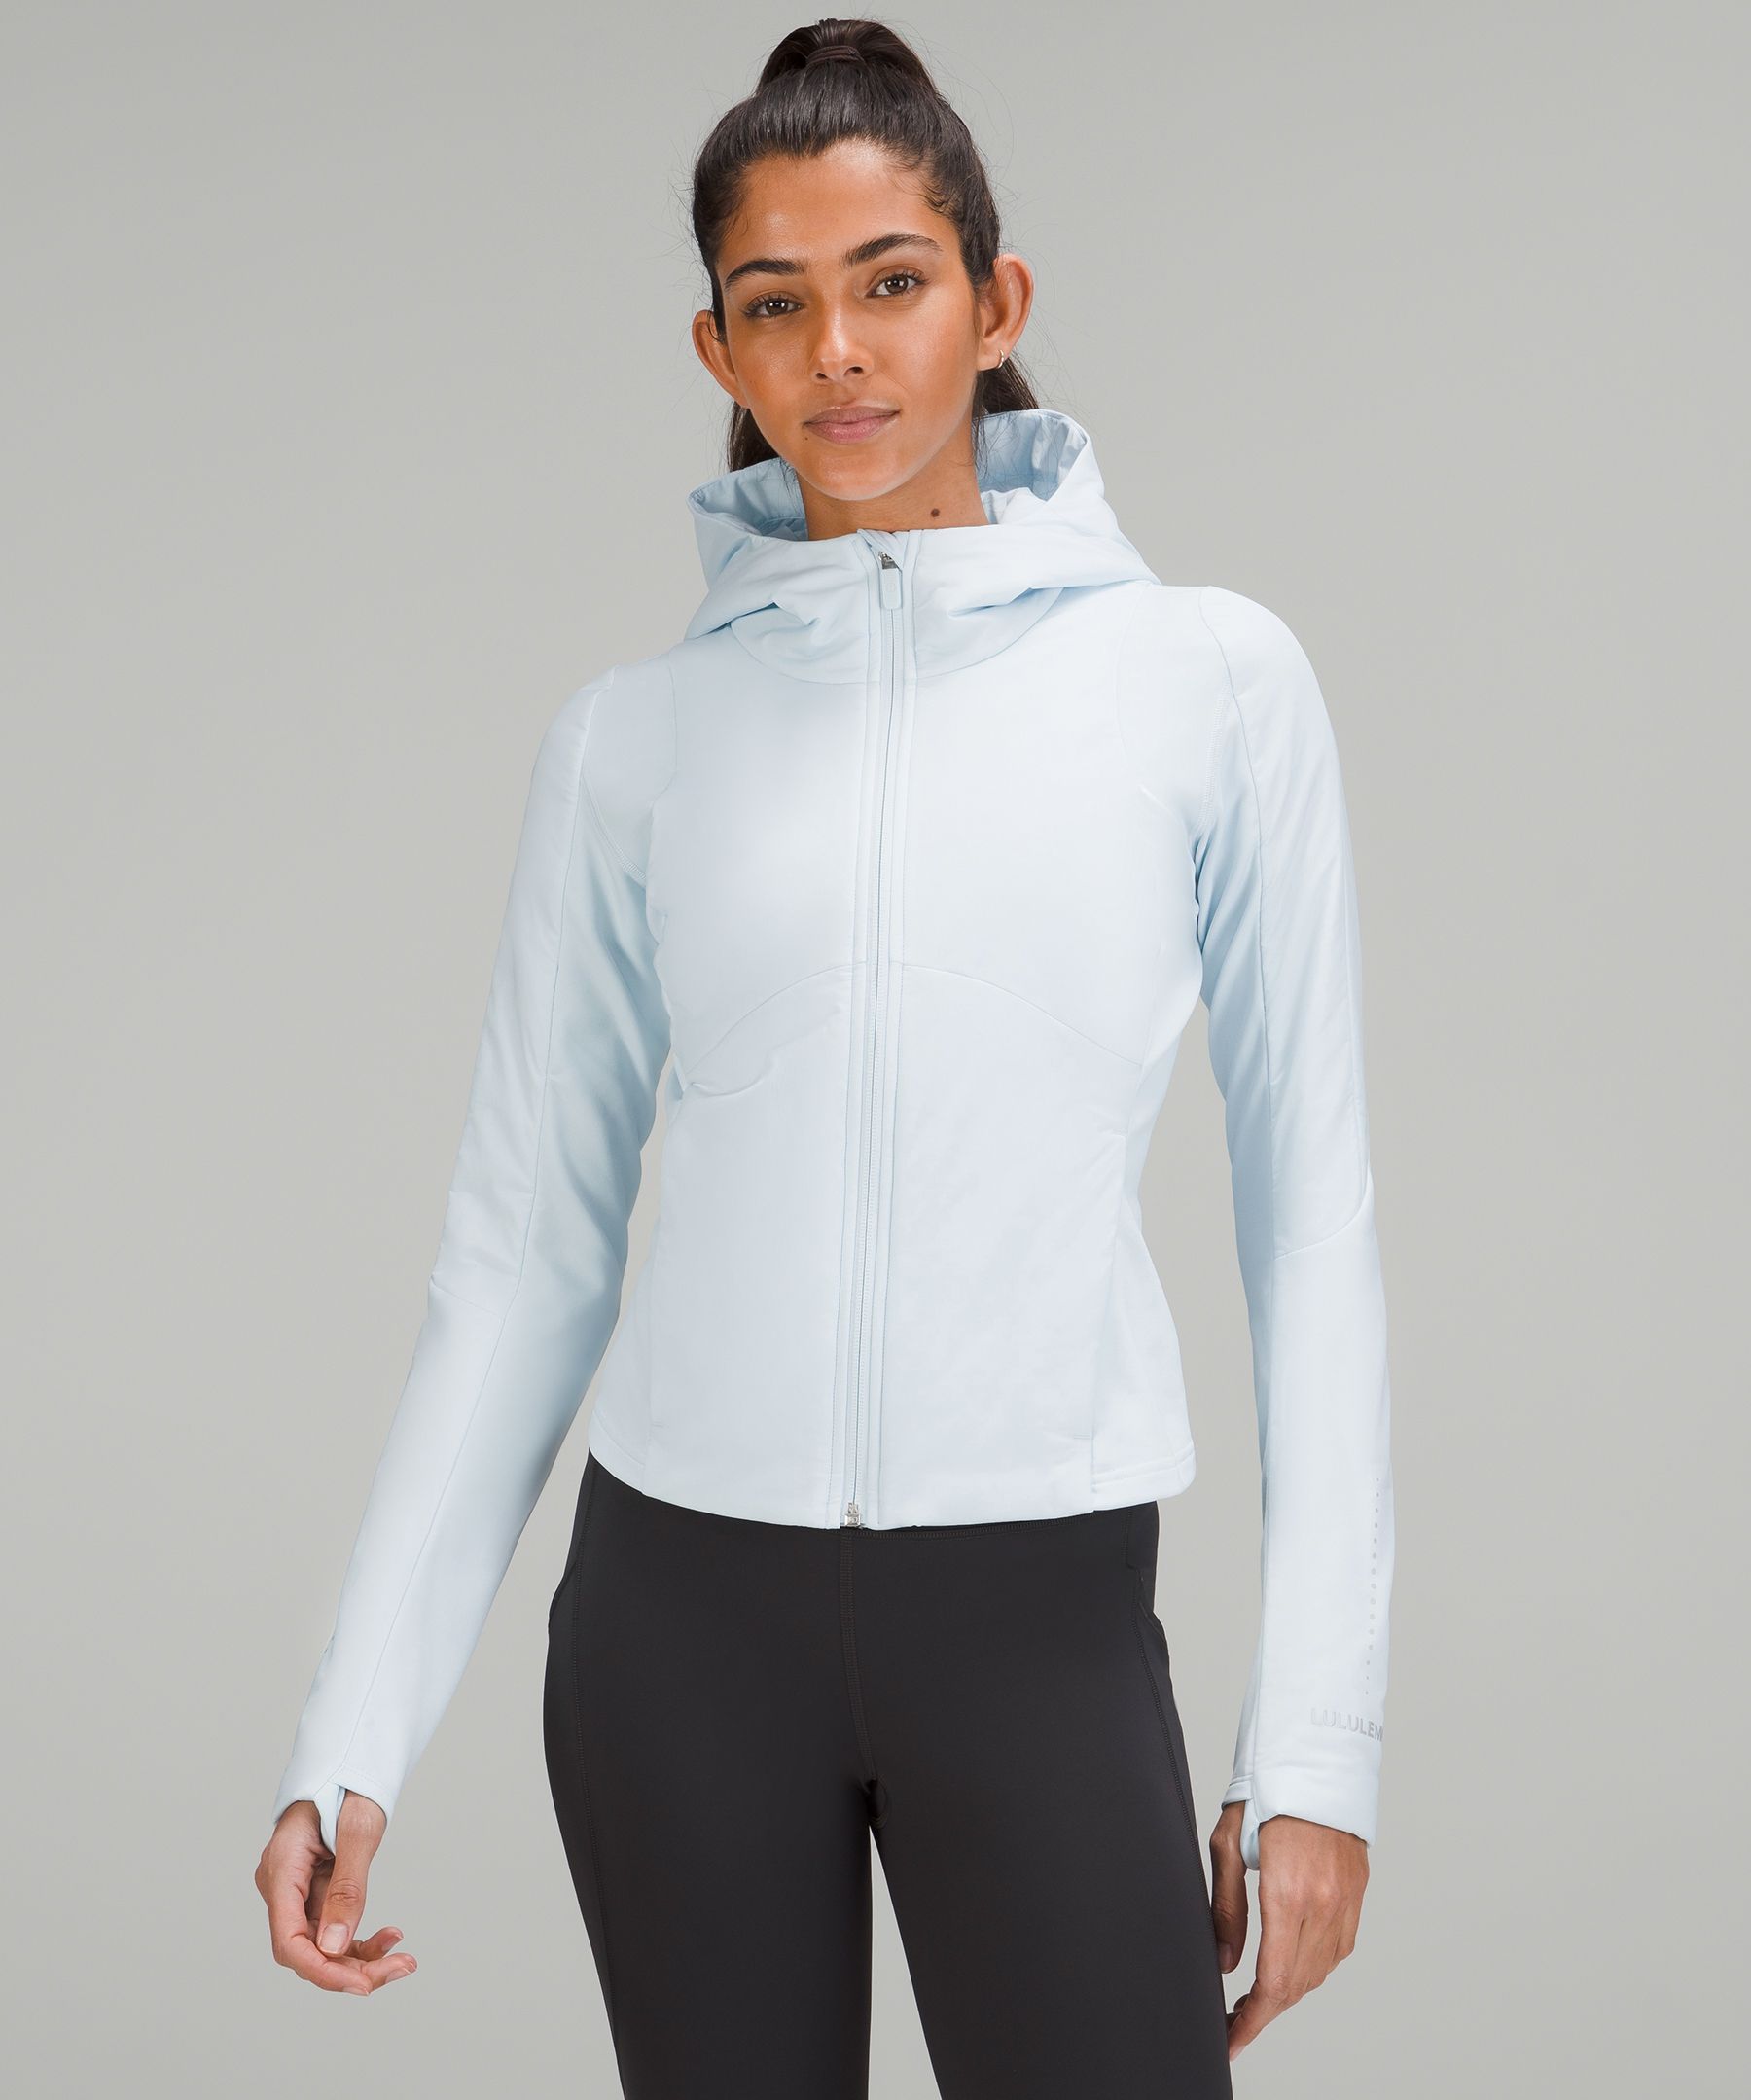 Fit Review Friday! Store Try Ons License To Train Tight Fit Tank,  Reversible Crossover Sweater, Push Your Pace Jacket and Huge WMTM Update!